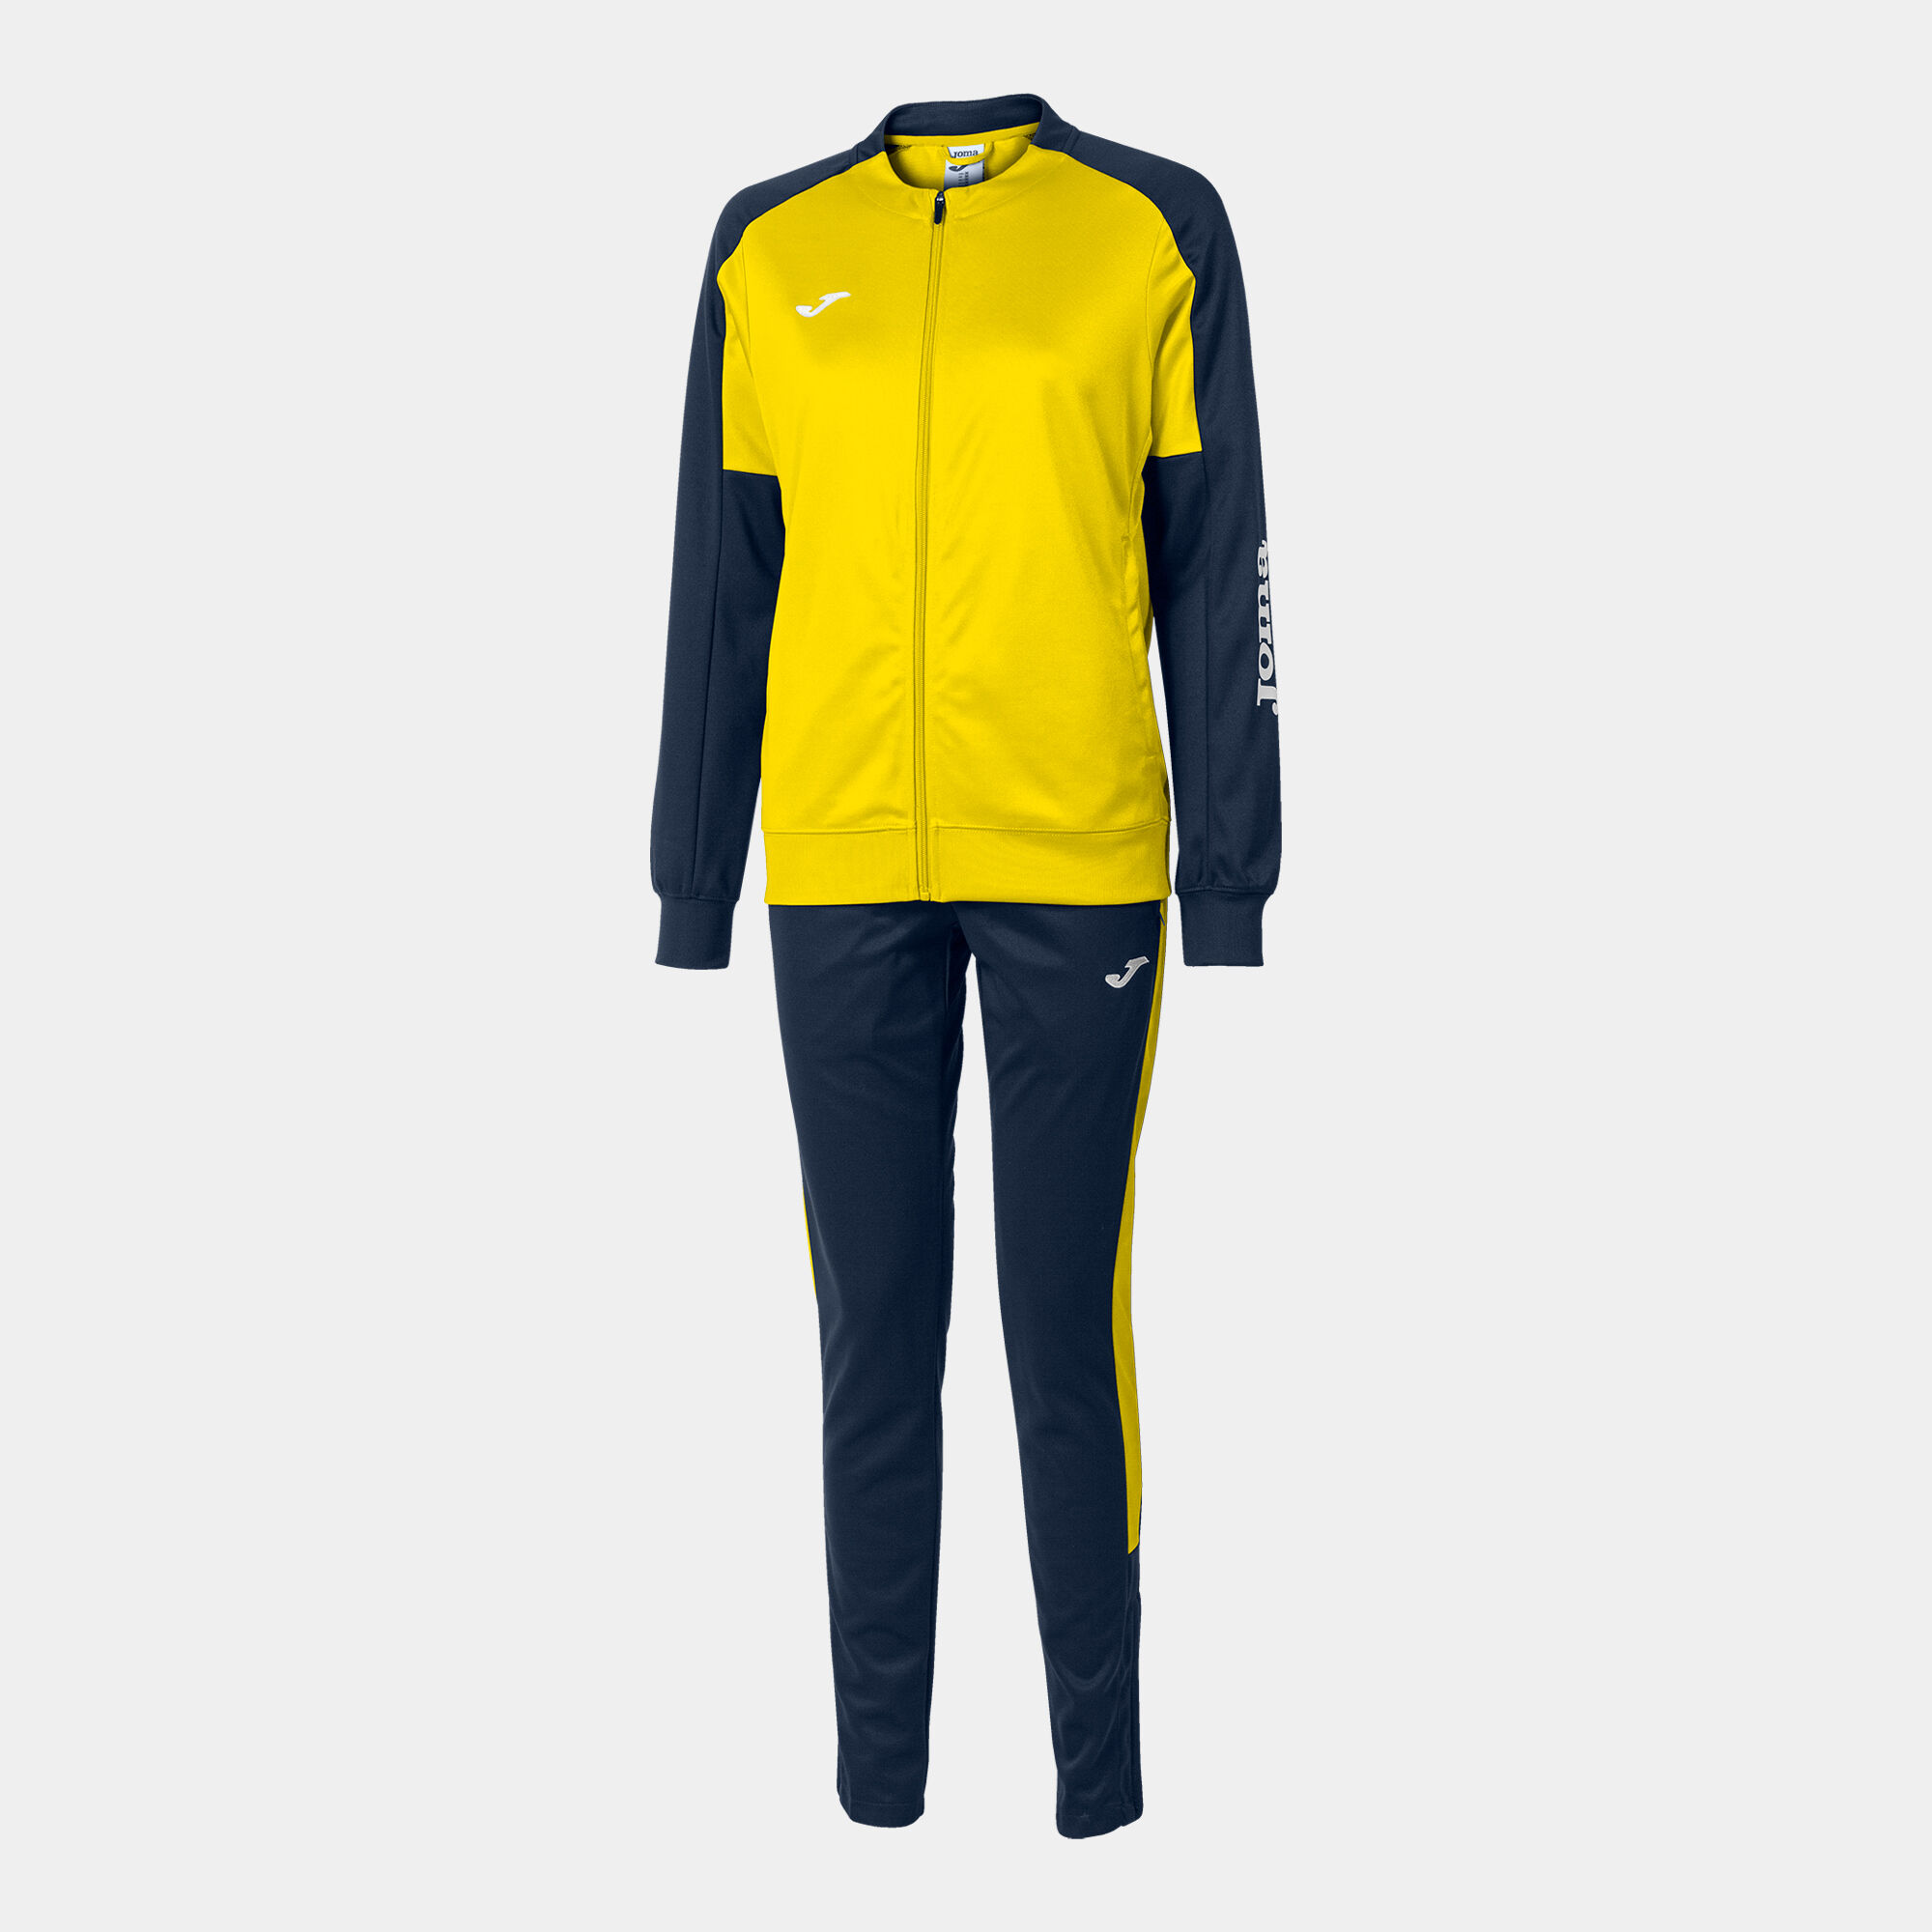 Tracksuit woman Eco Championship yellow navy blue